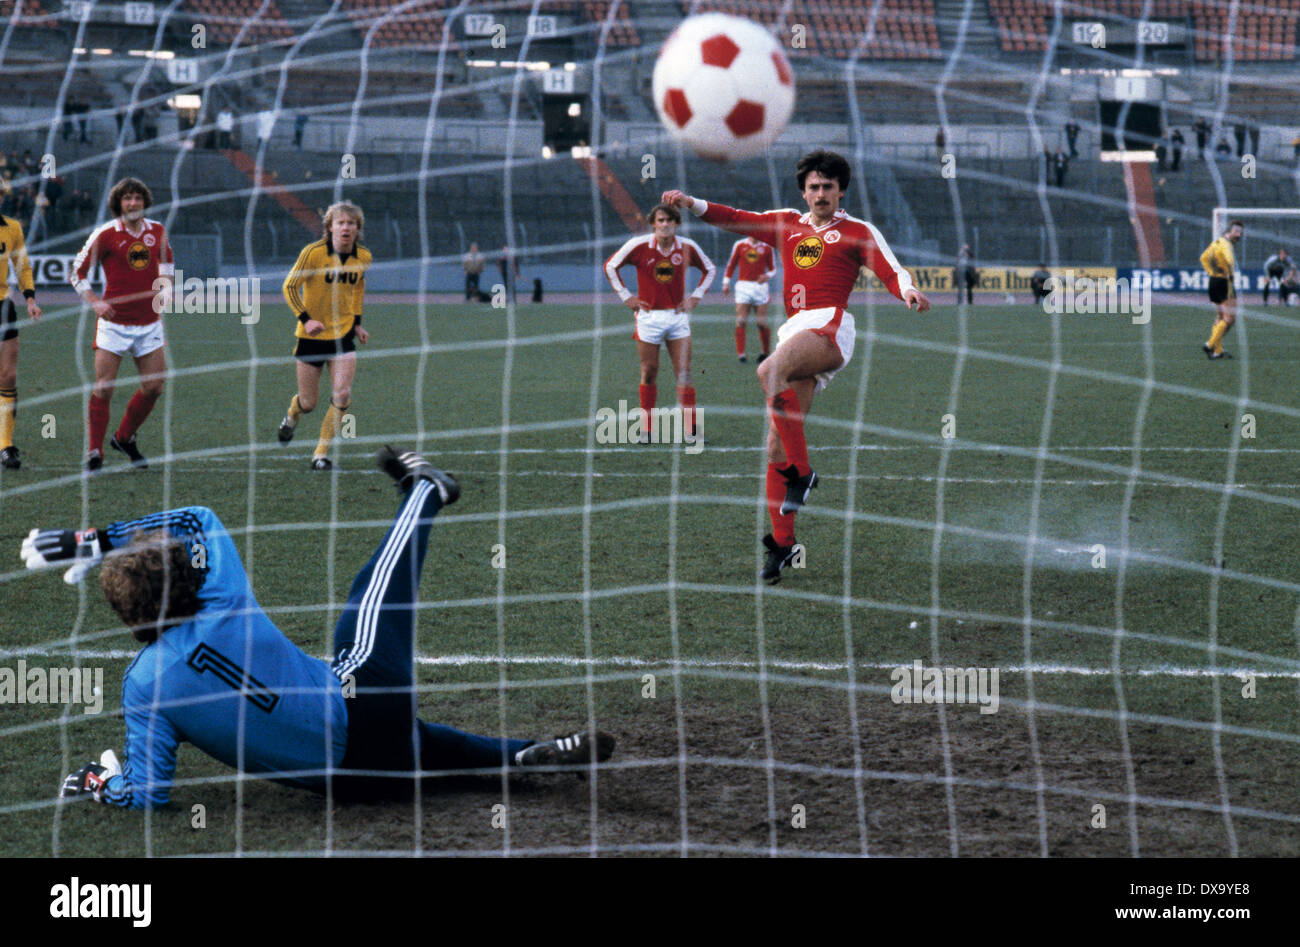 football, Bundesliga, 1980/1981, Rhine Stadium, Fortuna Duesseldorf versus Borussia Dortmund 2:2, scene of the match, Klaus Allofs (Fortuna) scores the 1:0 goal by penalty resulting from a foul, keeper Eike Immel (BVB) is chanceless Stock Photo